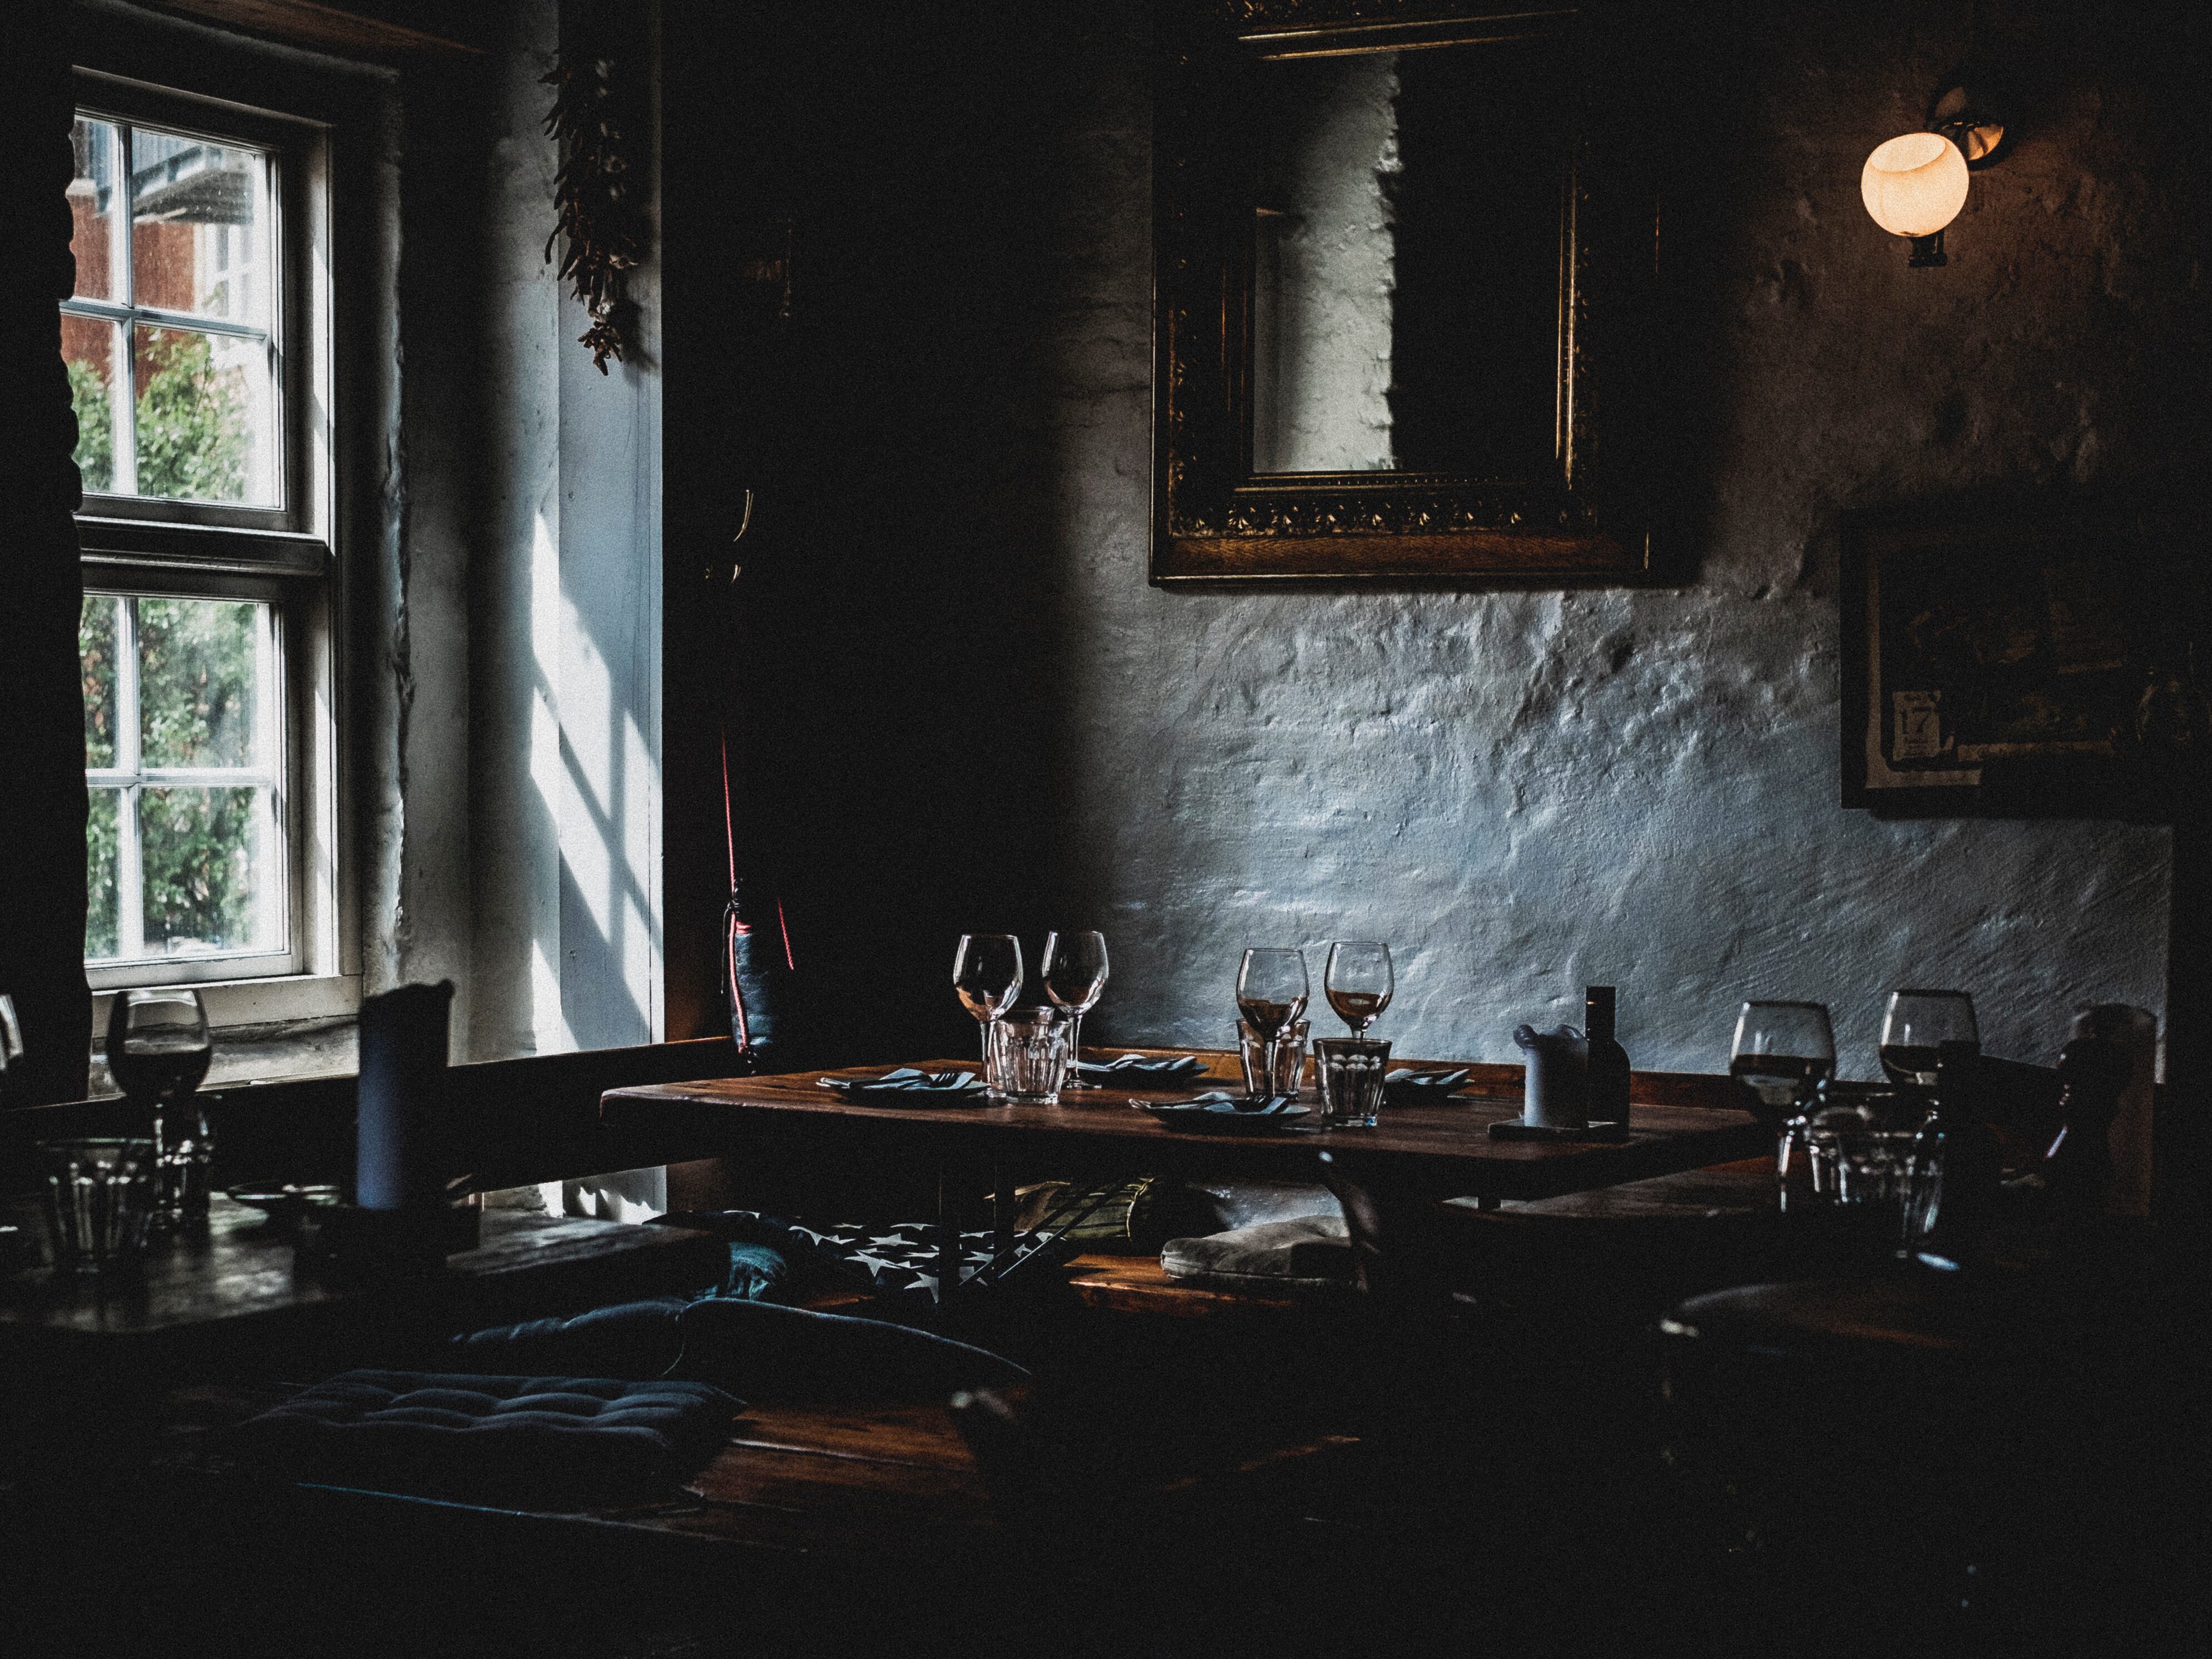 Image of a dimly lit pub with empty tables, capturing the quiet and somewhat eerie atmosphere of an afternoon between lunch and dinner service. 